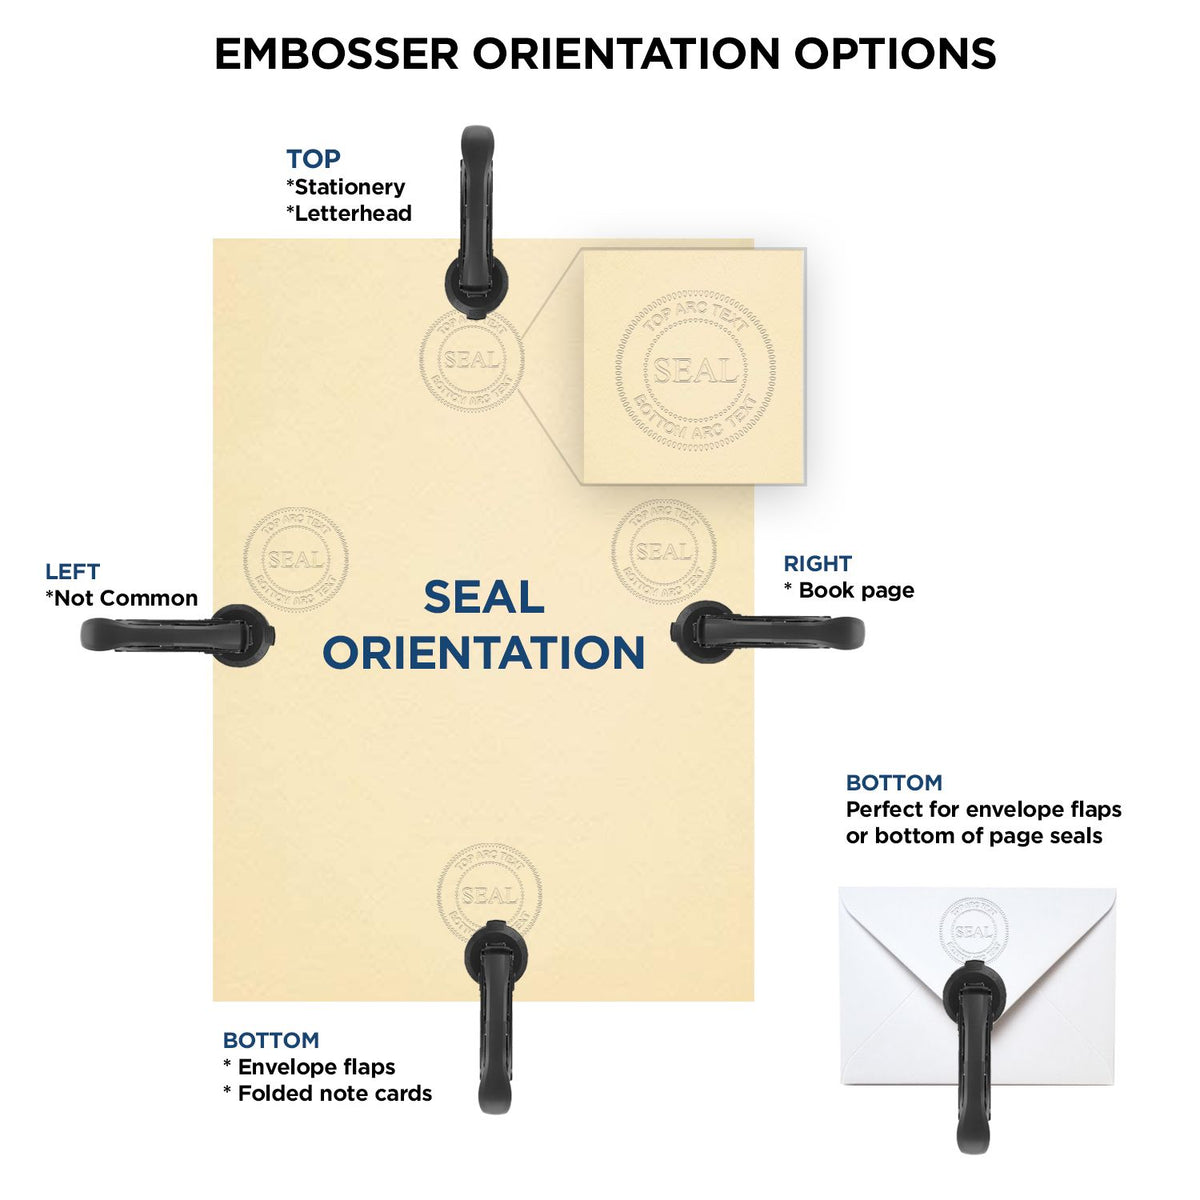 An infographic for the State of Arizona Extended Long Reach Geologist Seal showing embosser orientation, this is showing examples of a top, bottom, right and left insert.